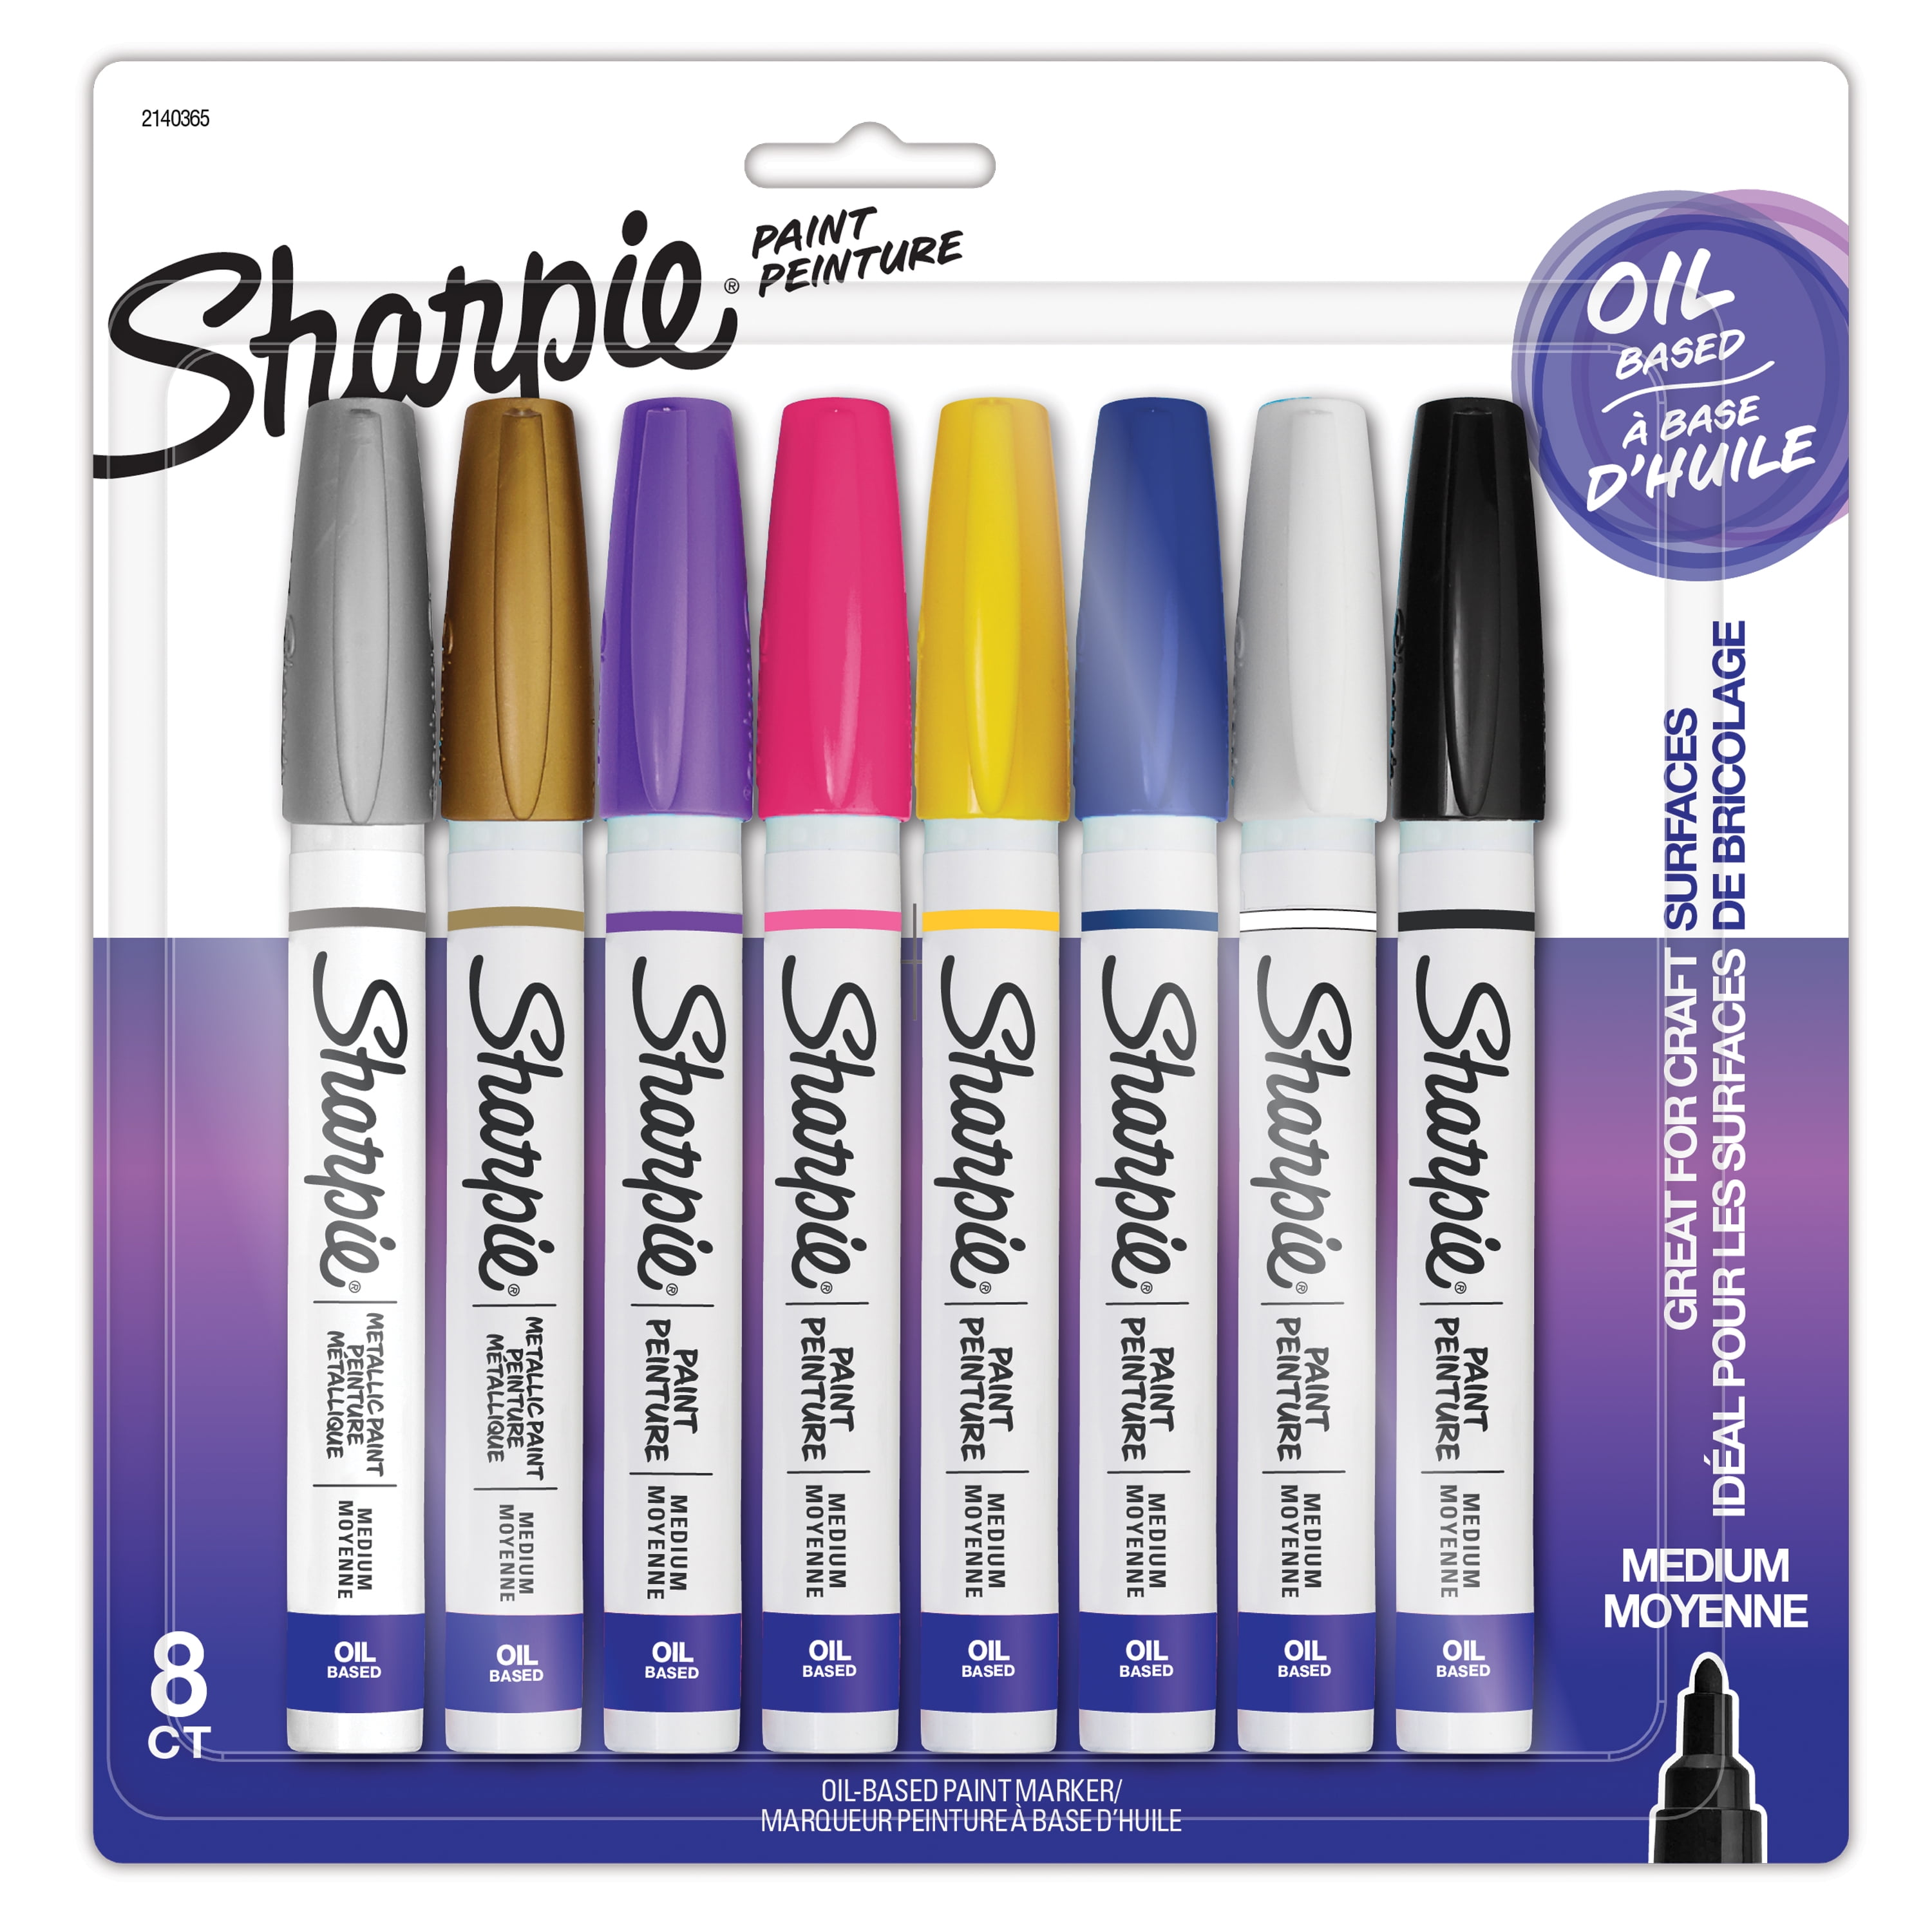 Sharpie Oil-Based Paint Markers Medium Point Metallic Gold and Silver 2 Count